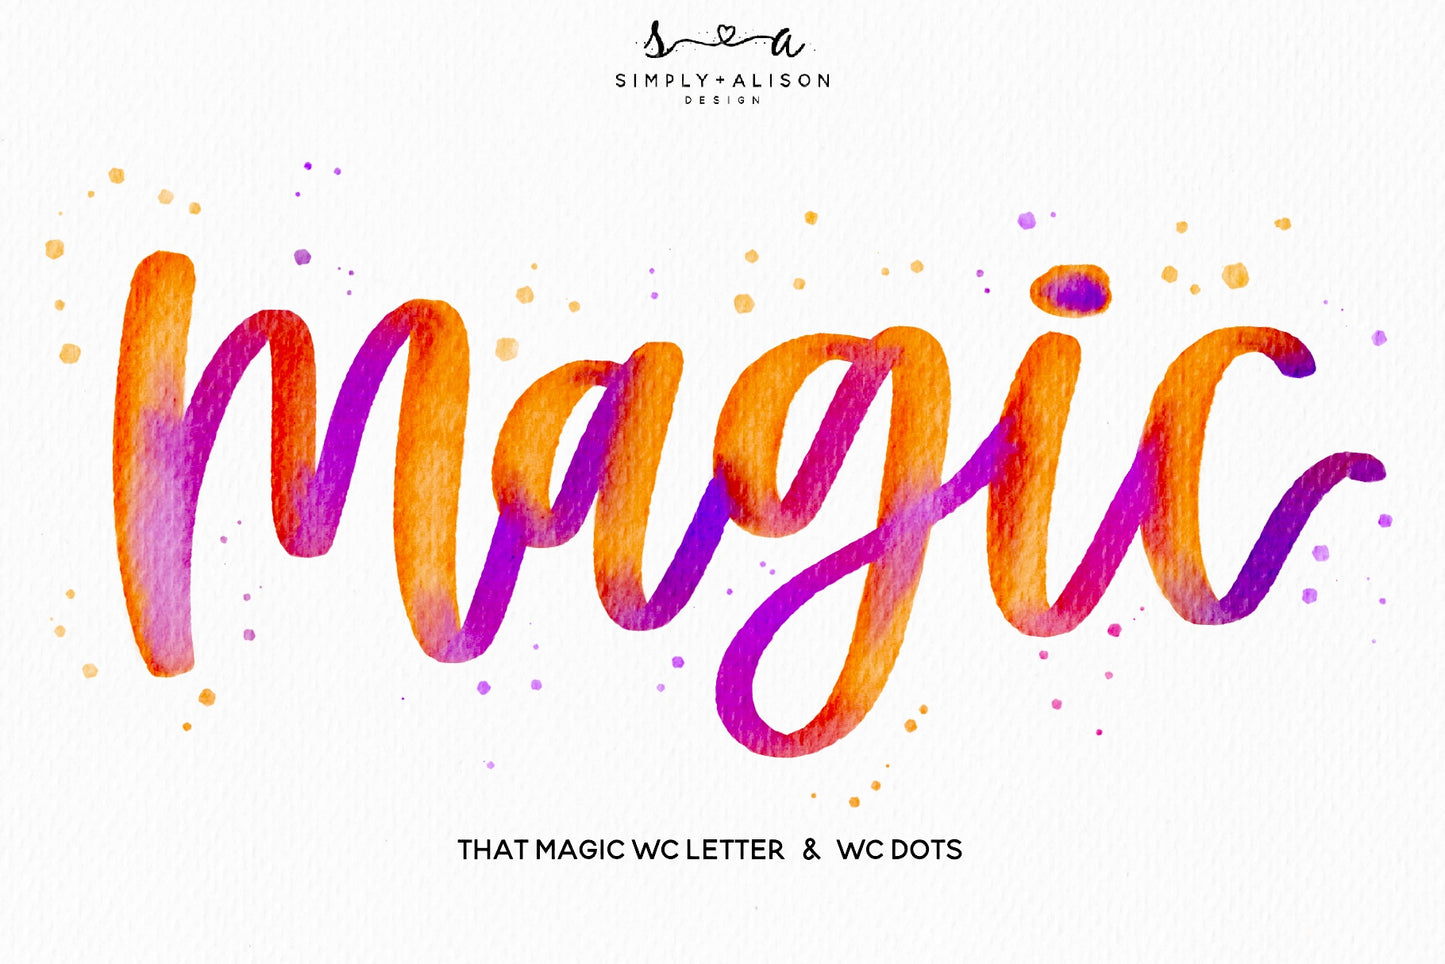 Realistic Watercolor Lettering Brushes